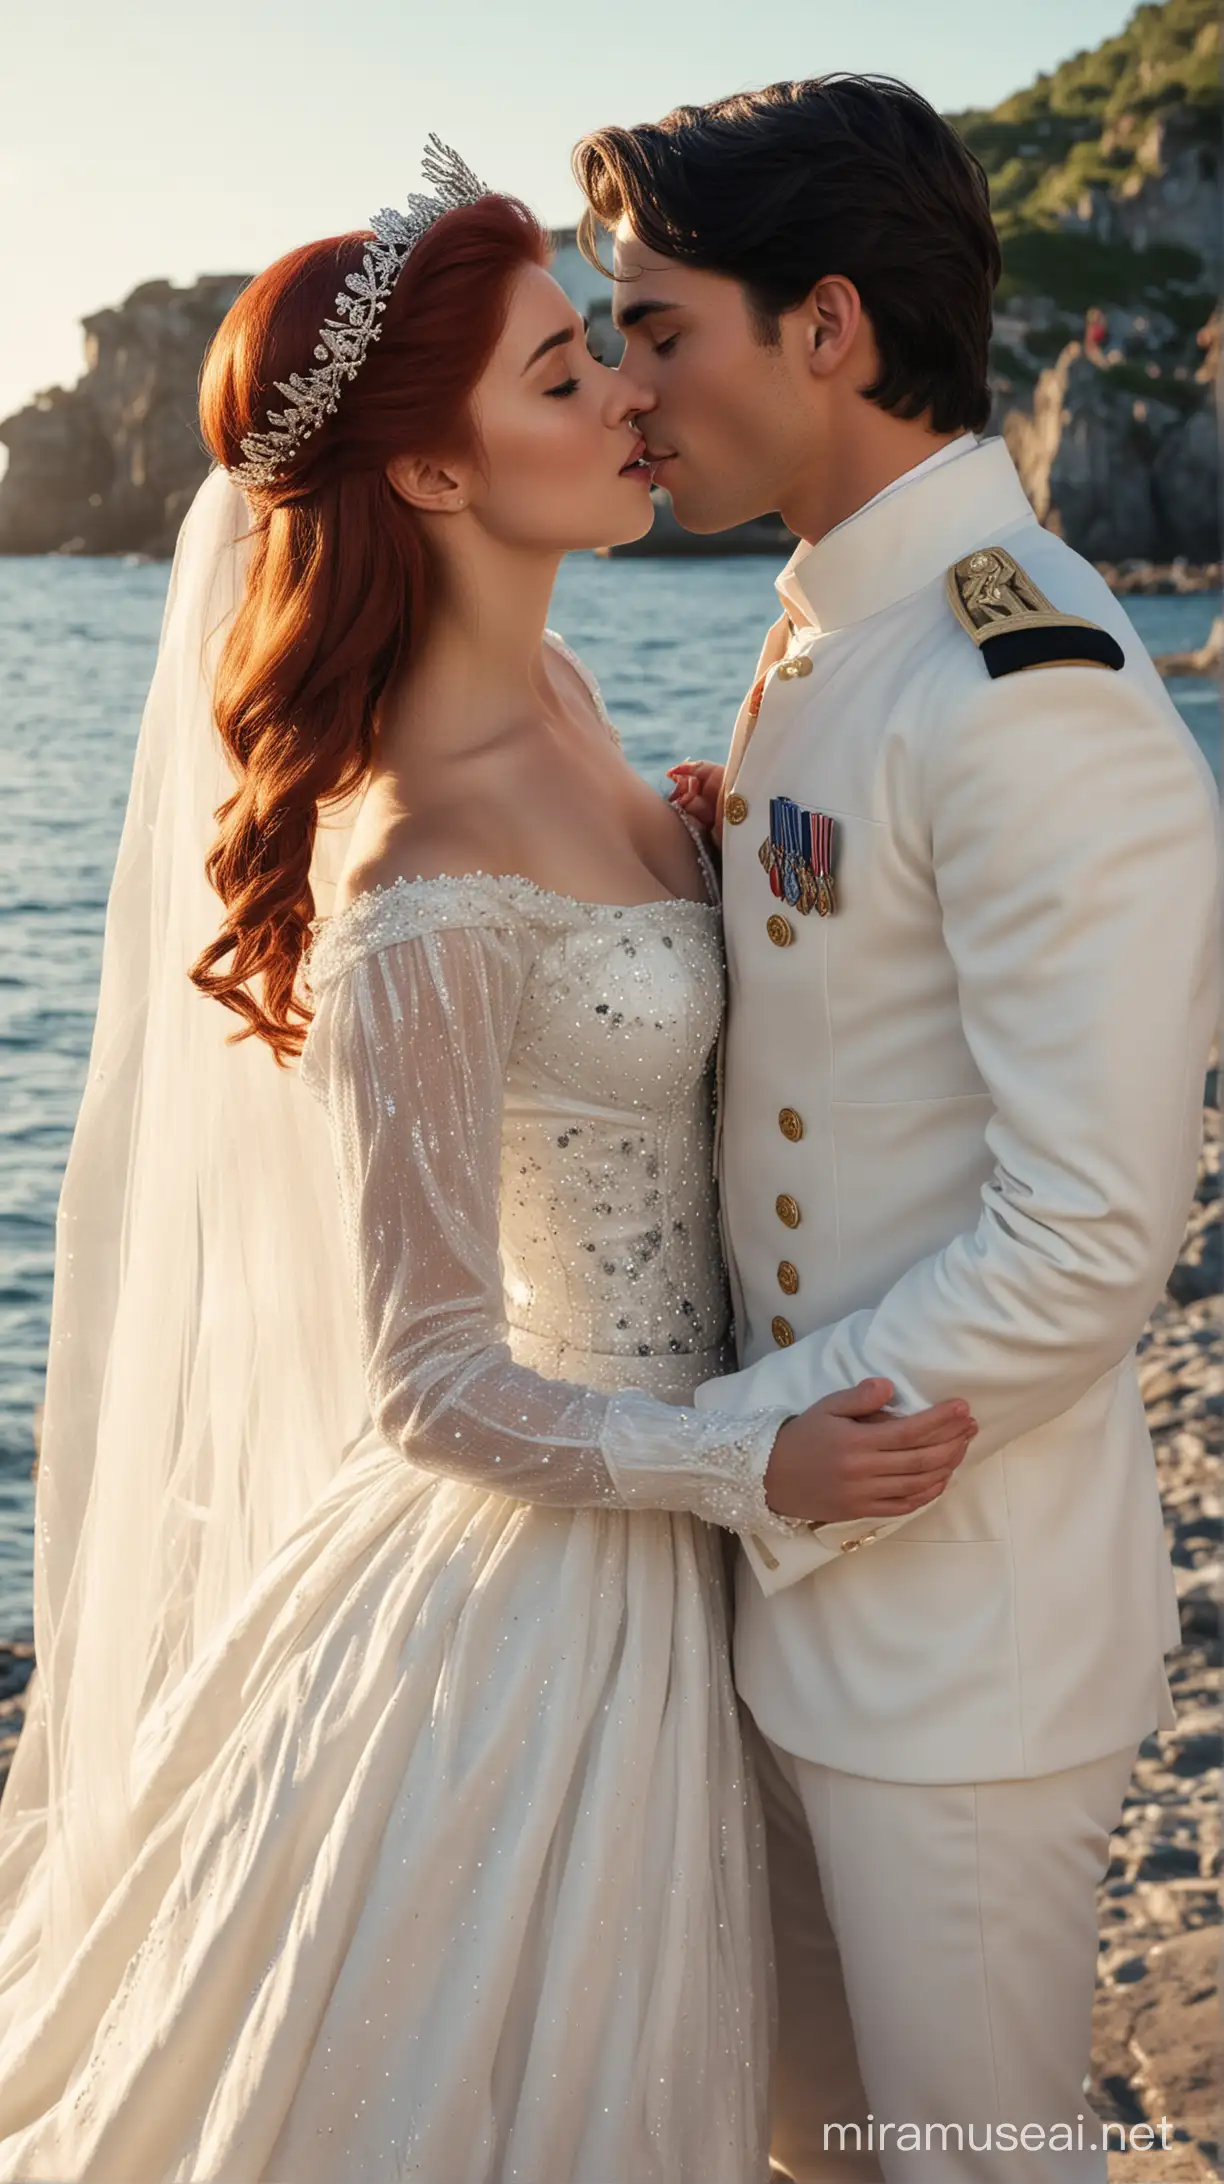 Danish Prince Eric and Ariel Romantic Kiss by the Natural Sea Beach